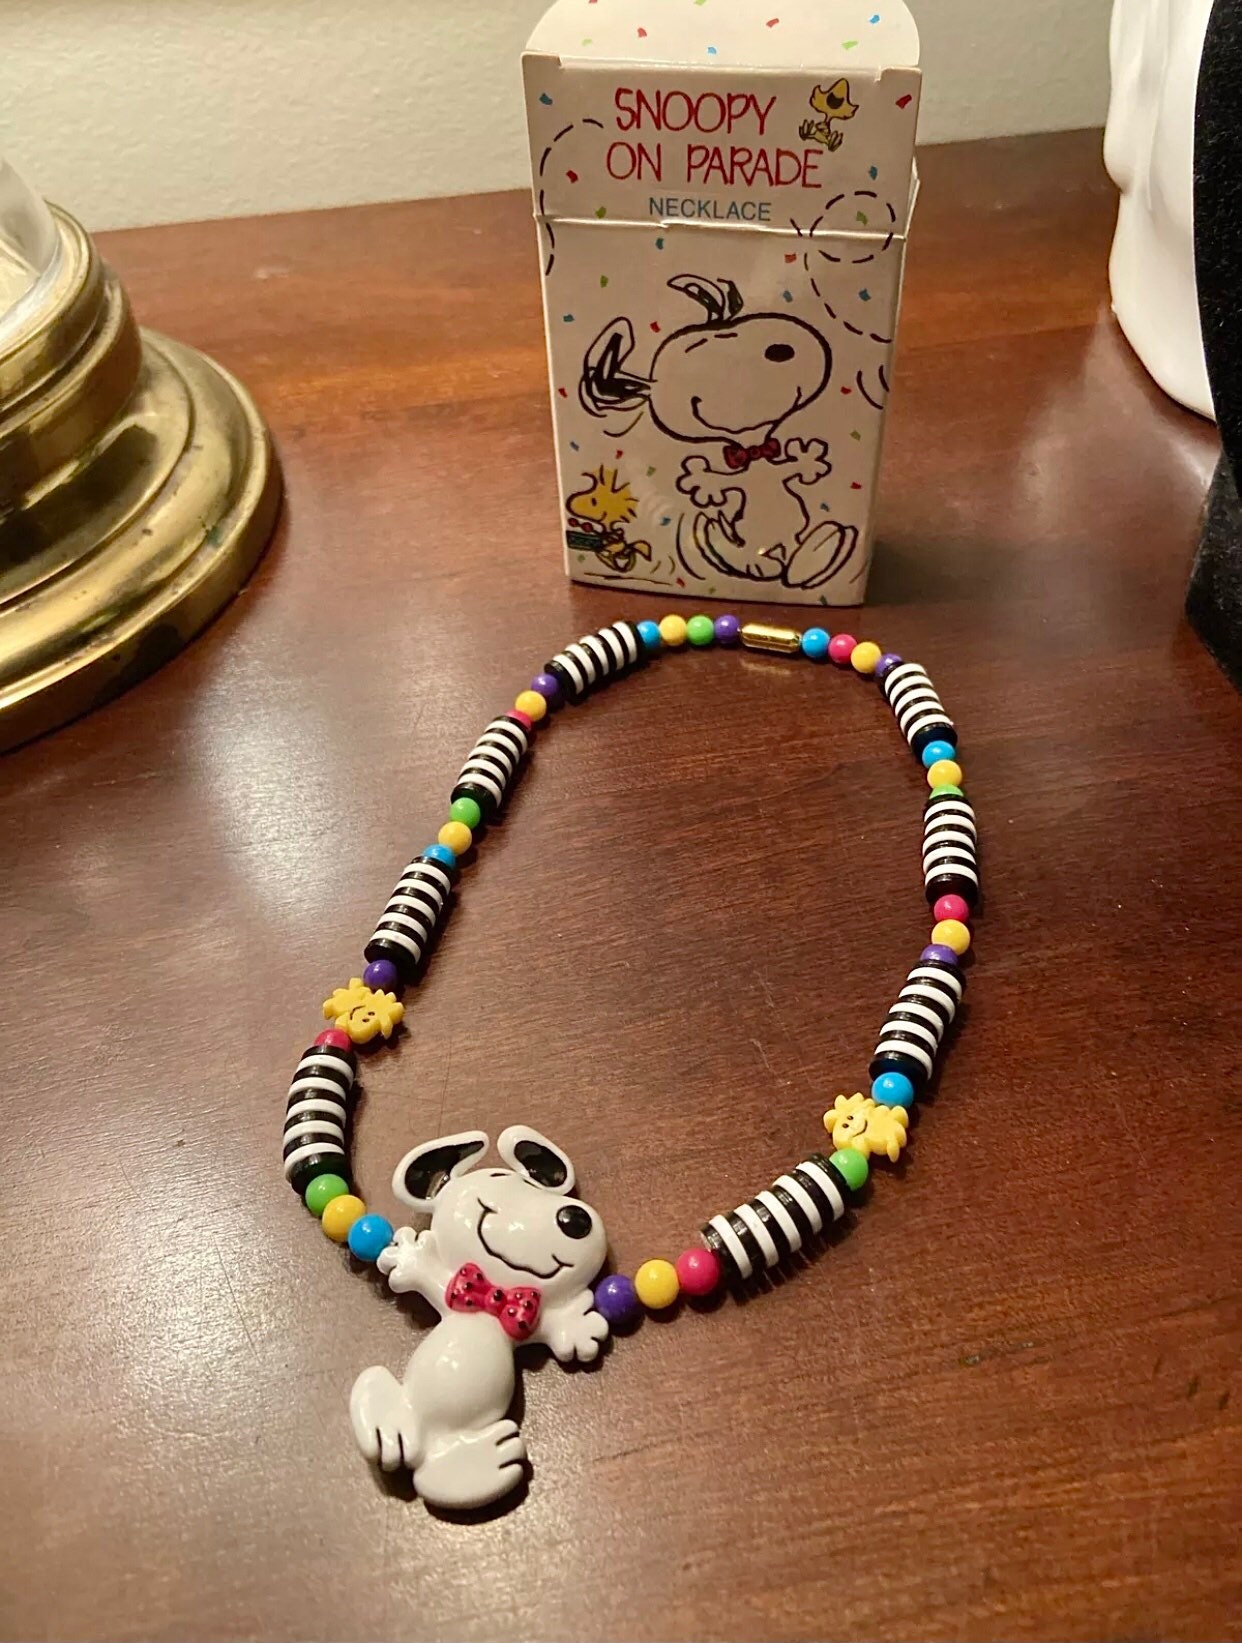 Vintage 90s Peanuts Snoopy Woodstock beaded lucite choker necklace Avon original box brand new deadstock colorful Y2K 80s